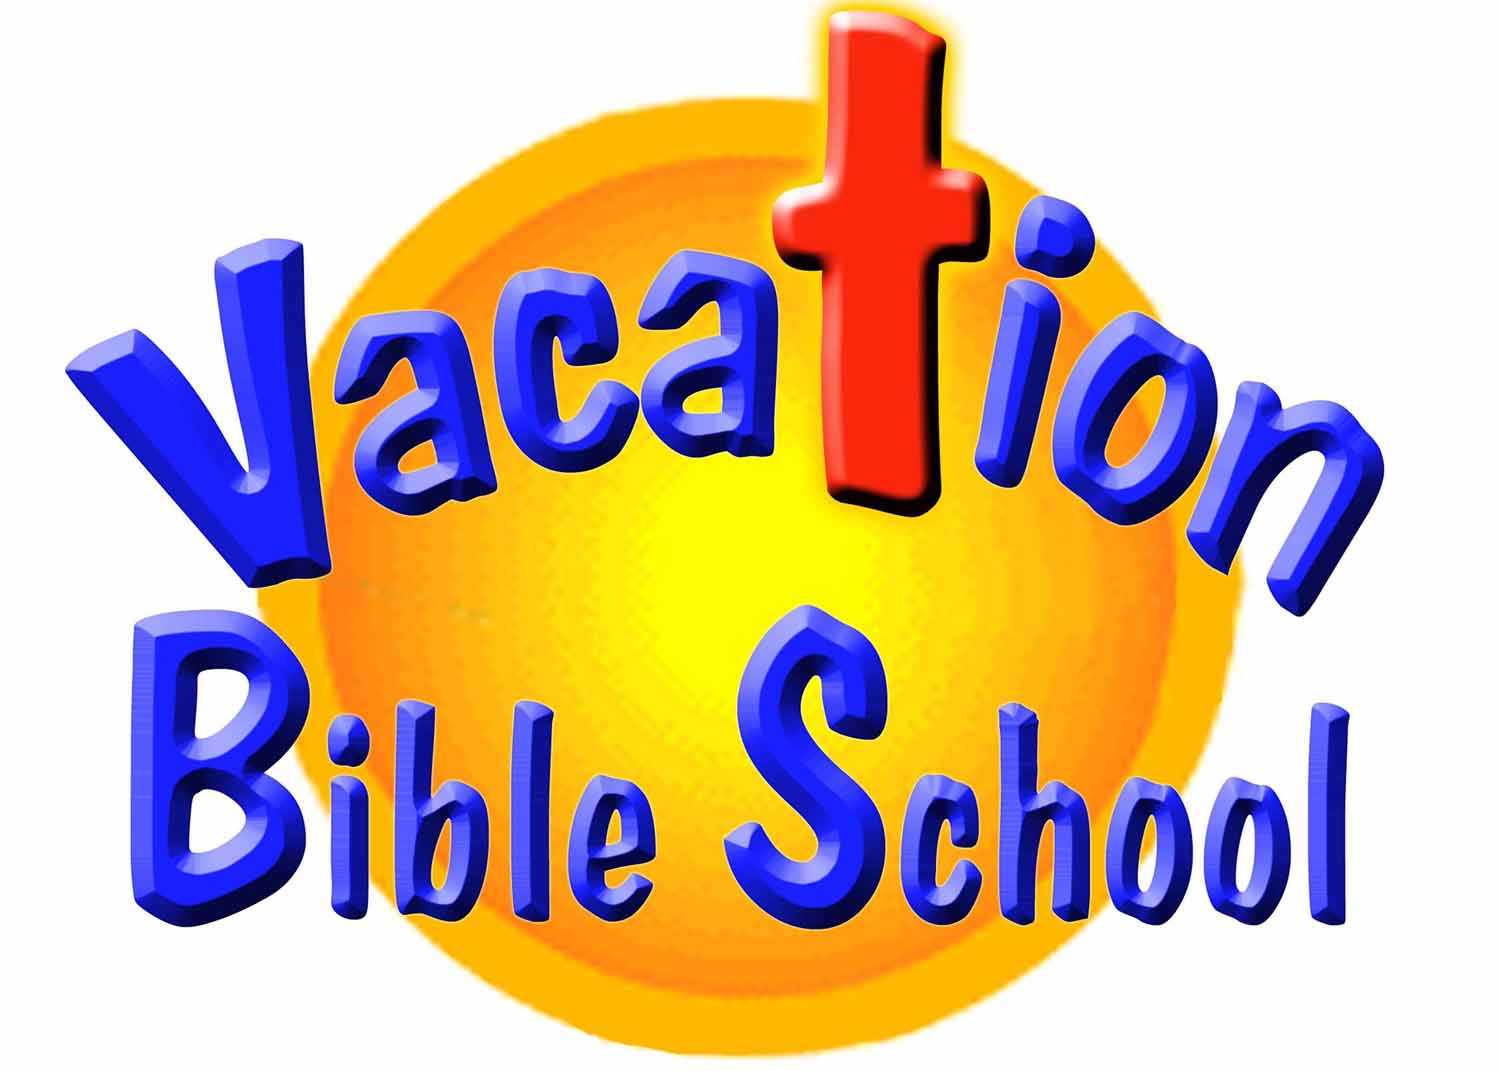 Free Vbs Training Cliparts, Download Free Clip Art, Free Regarding Free Vbs Certificate Templates